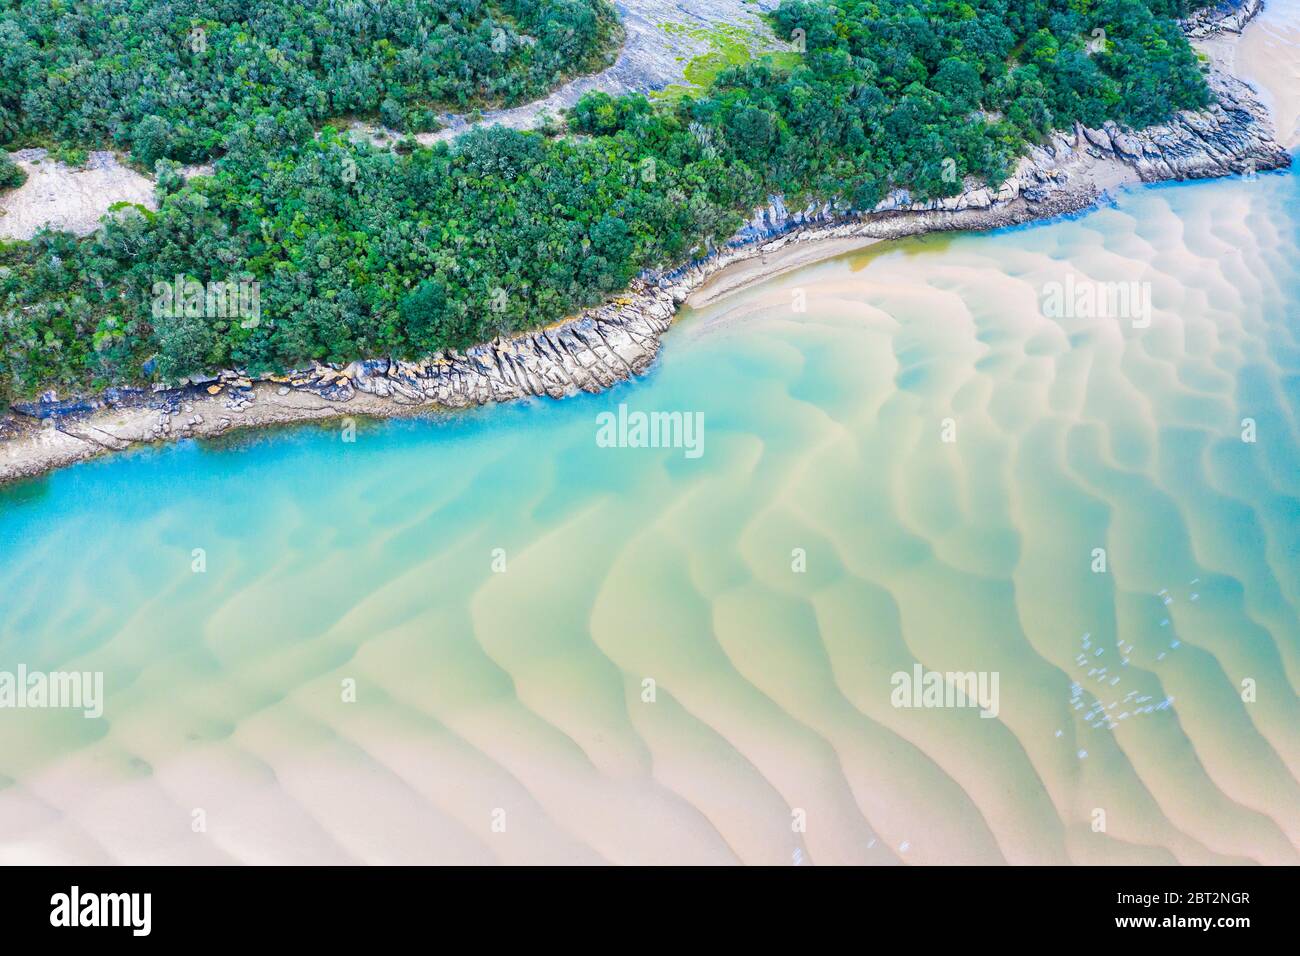 Sandy sediments in low tide in a river close to the sea. Stock Photo